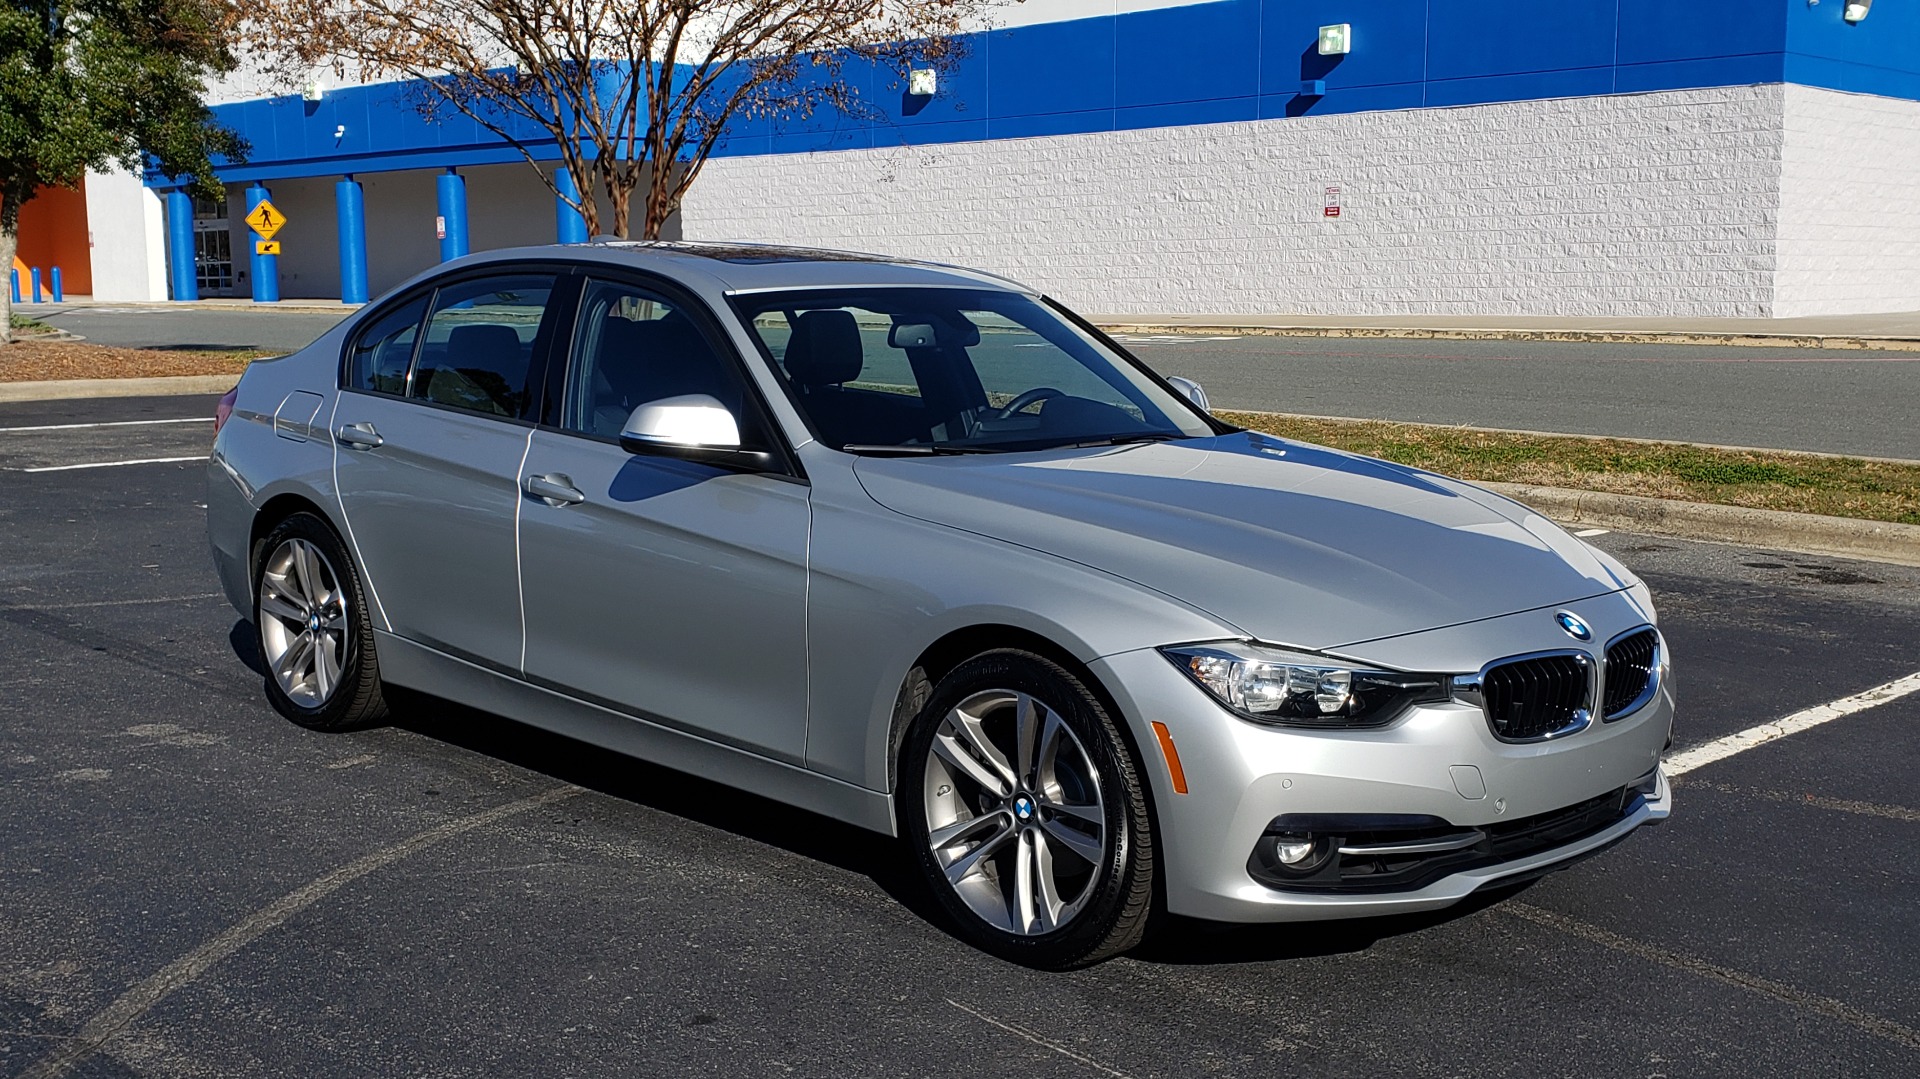 Used 2016 BMW 3 SERIES 328I / DRVR ASST / SUNROOF / REARVIEW / 18IN ALLOY WHLS for sale Sold at Formula Imports in Charlotte NC 28227 4